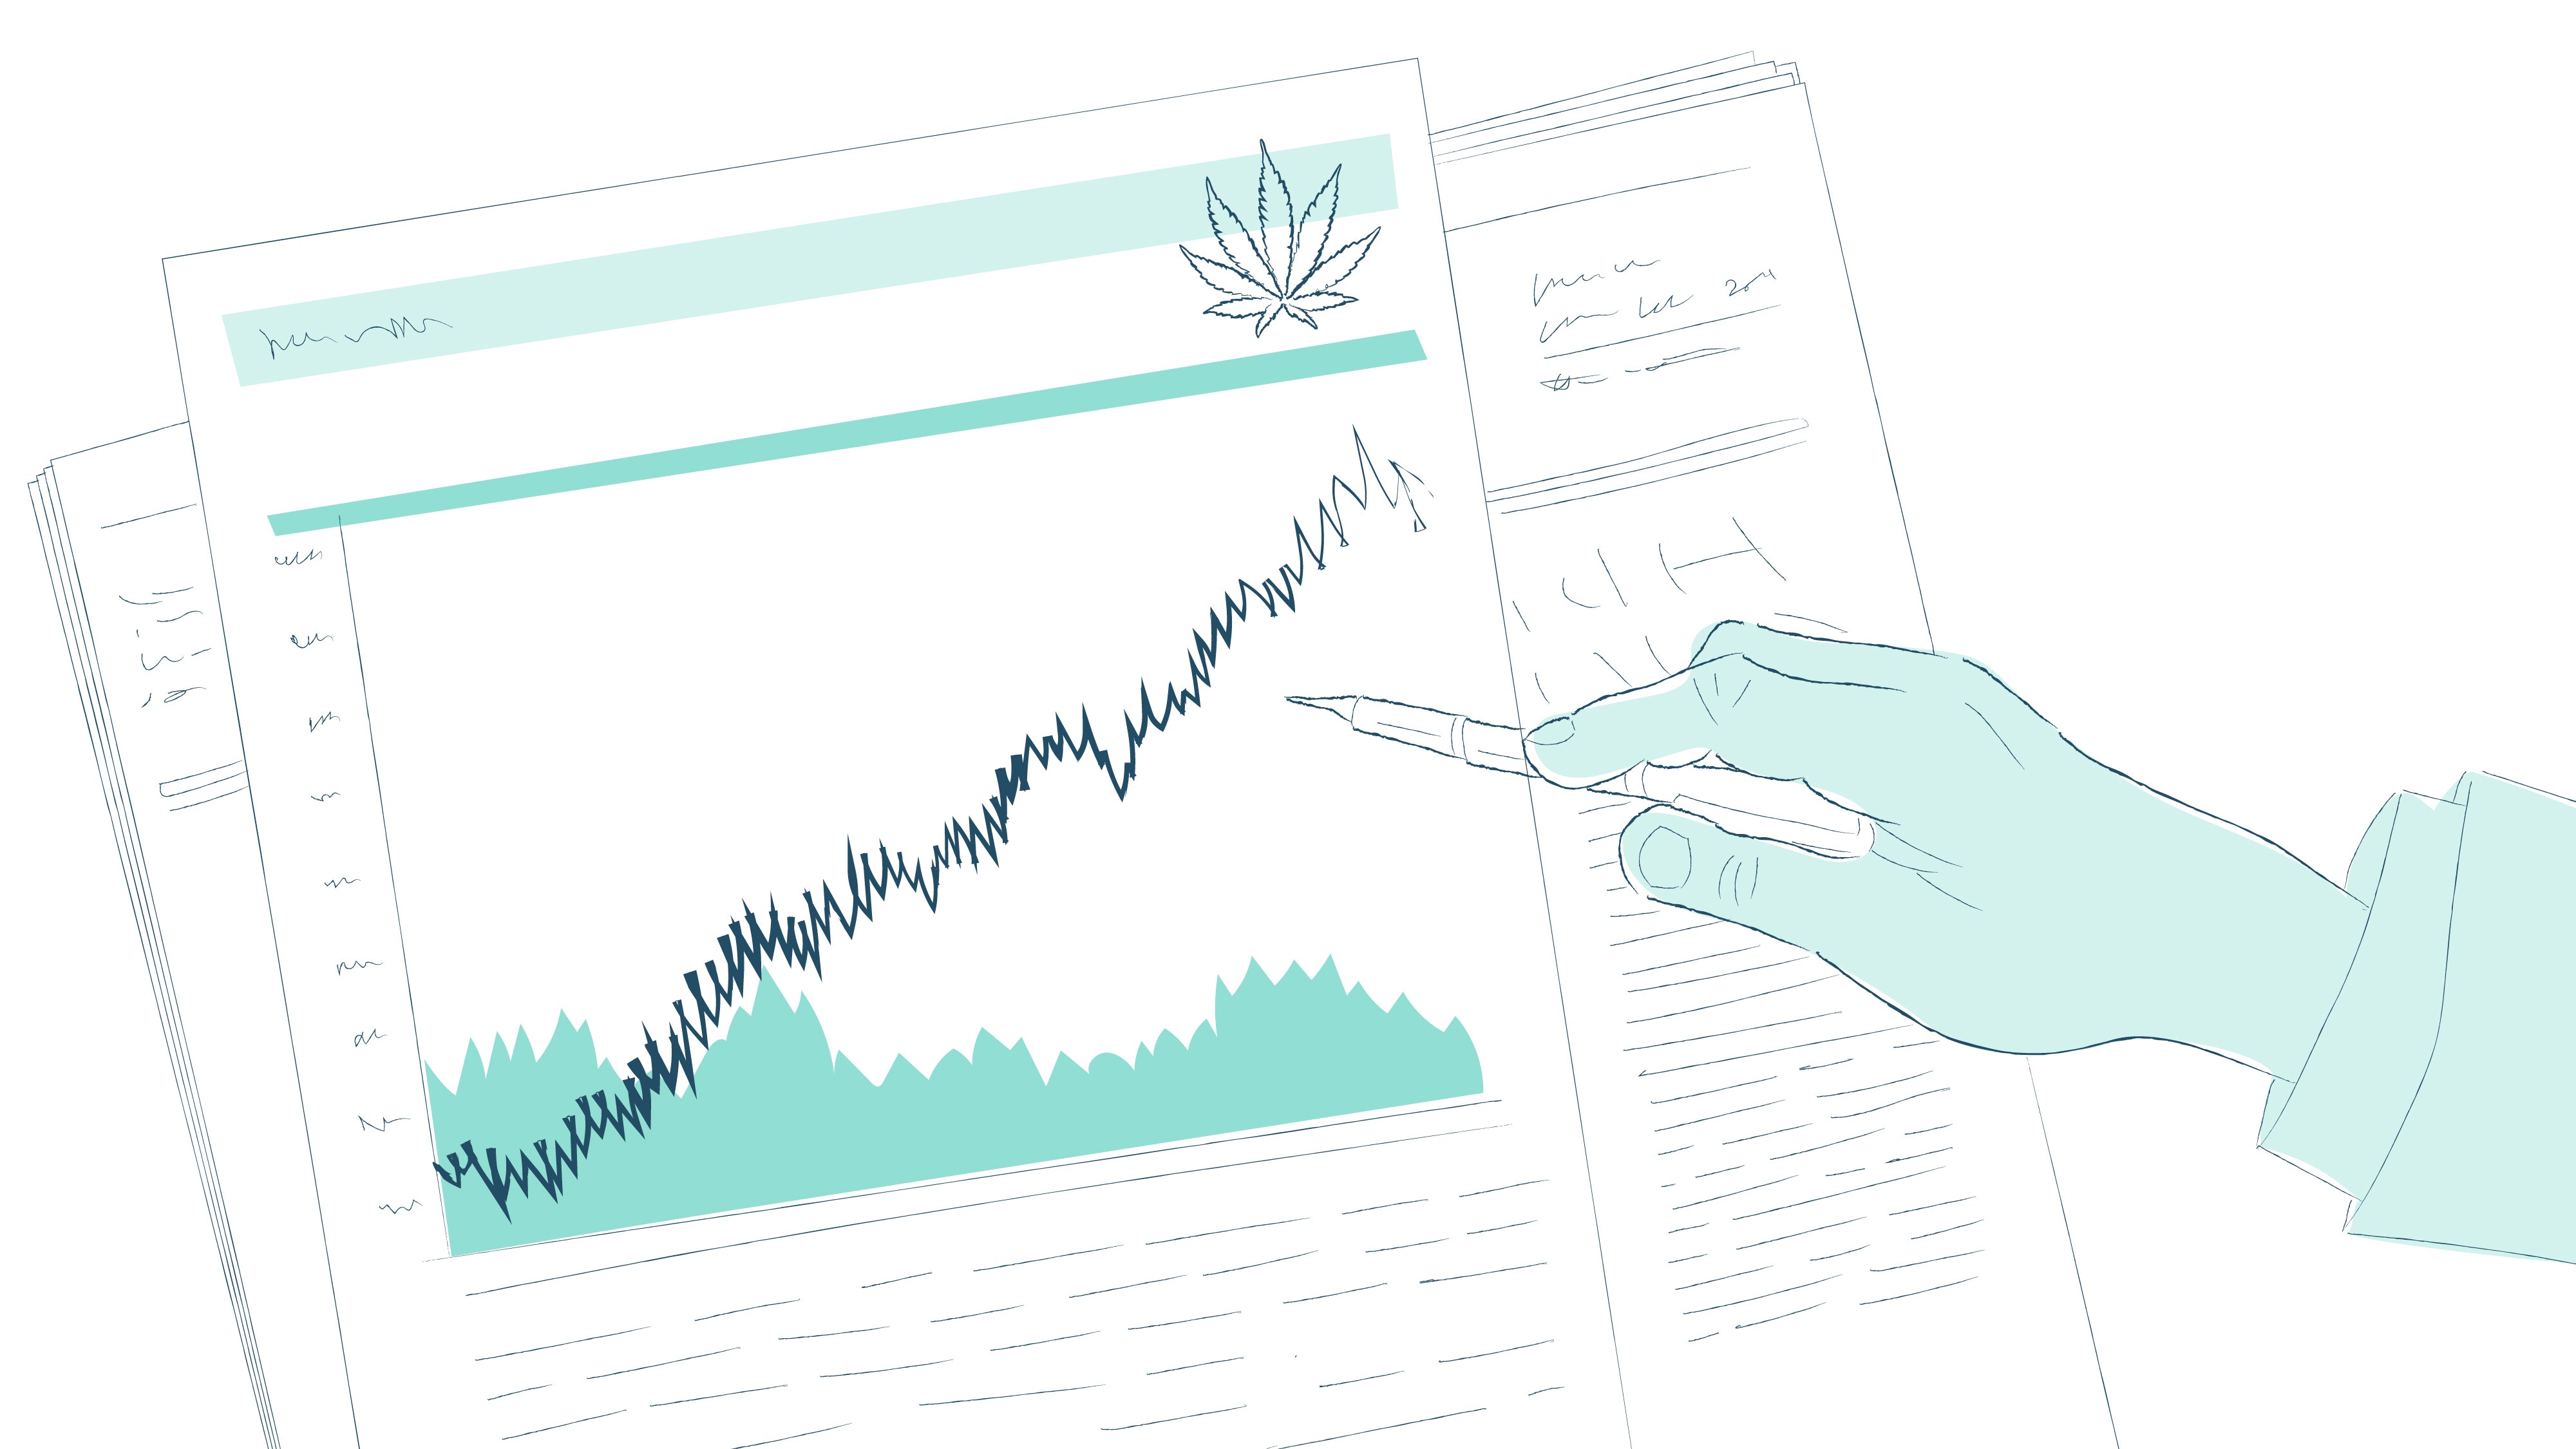 Why Cannabis Stocks Are Surging To Close The Week: The Coronavirus Confusion